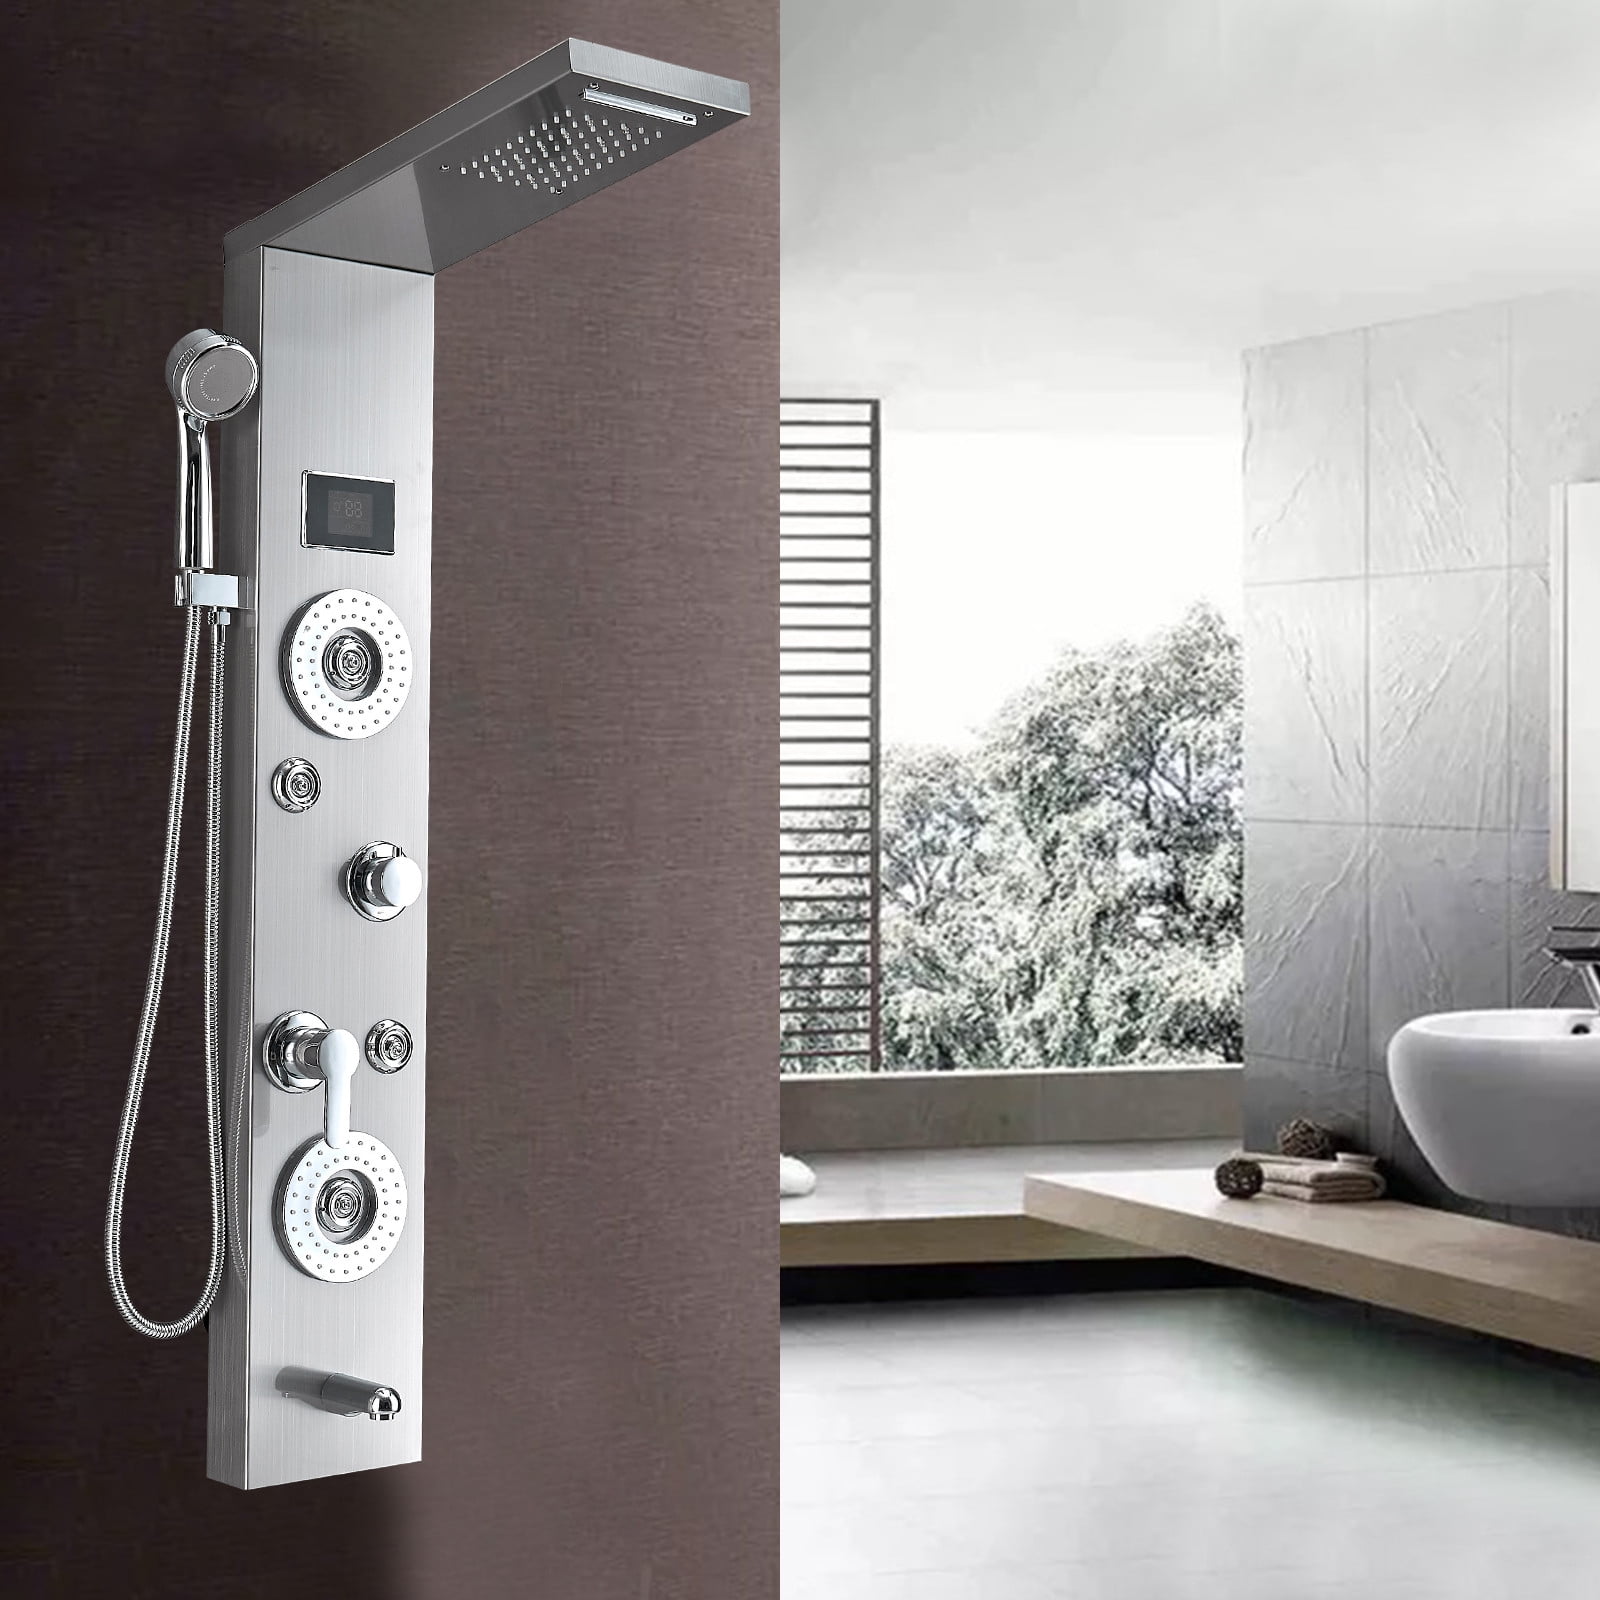 Stainless Steel Shower Panel Tower, External Tower Style Bathtub Drain